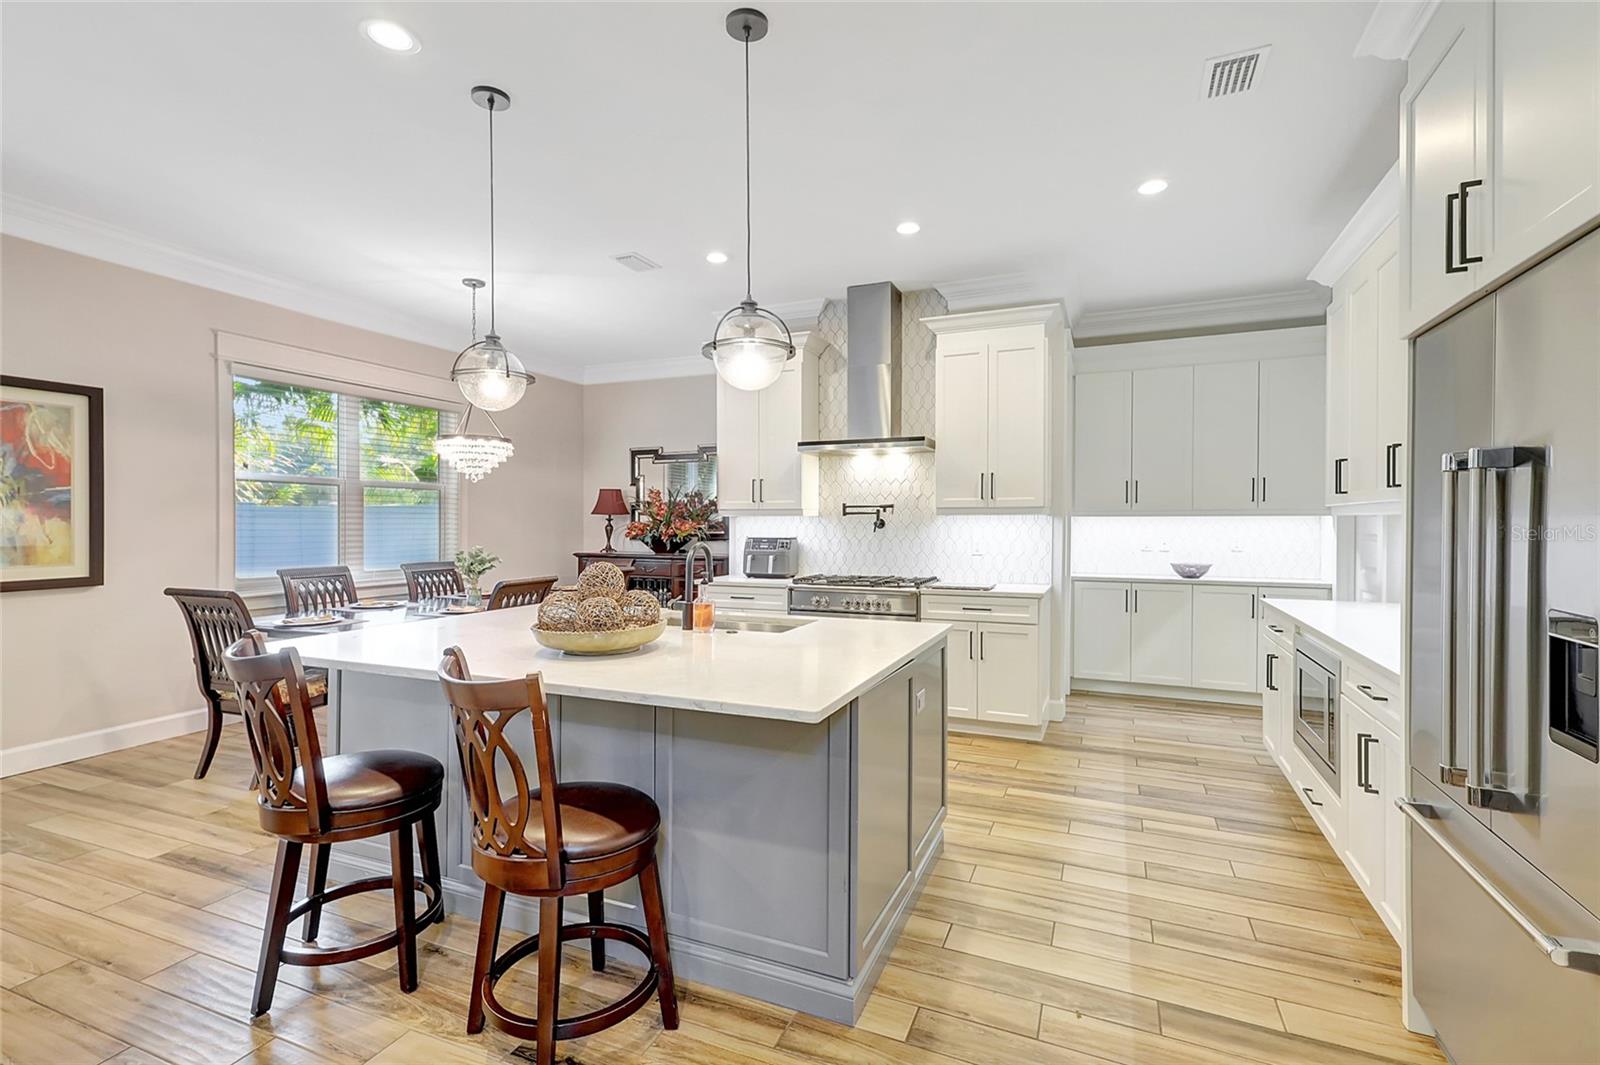 Gathering place kitchen features Fisher Paykel Appliances, walk in Pantry, butlers pantry and separate mud room.